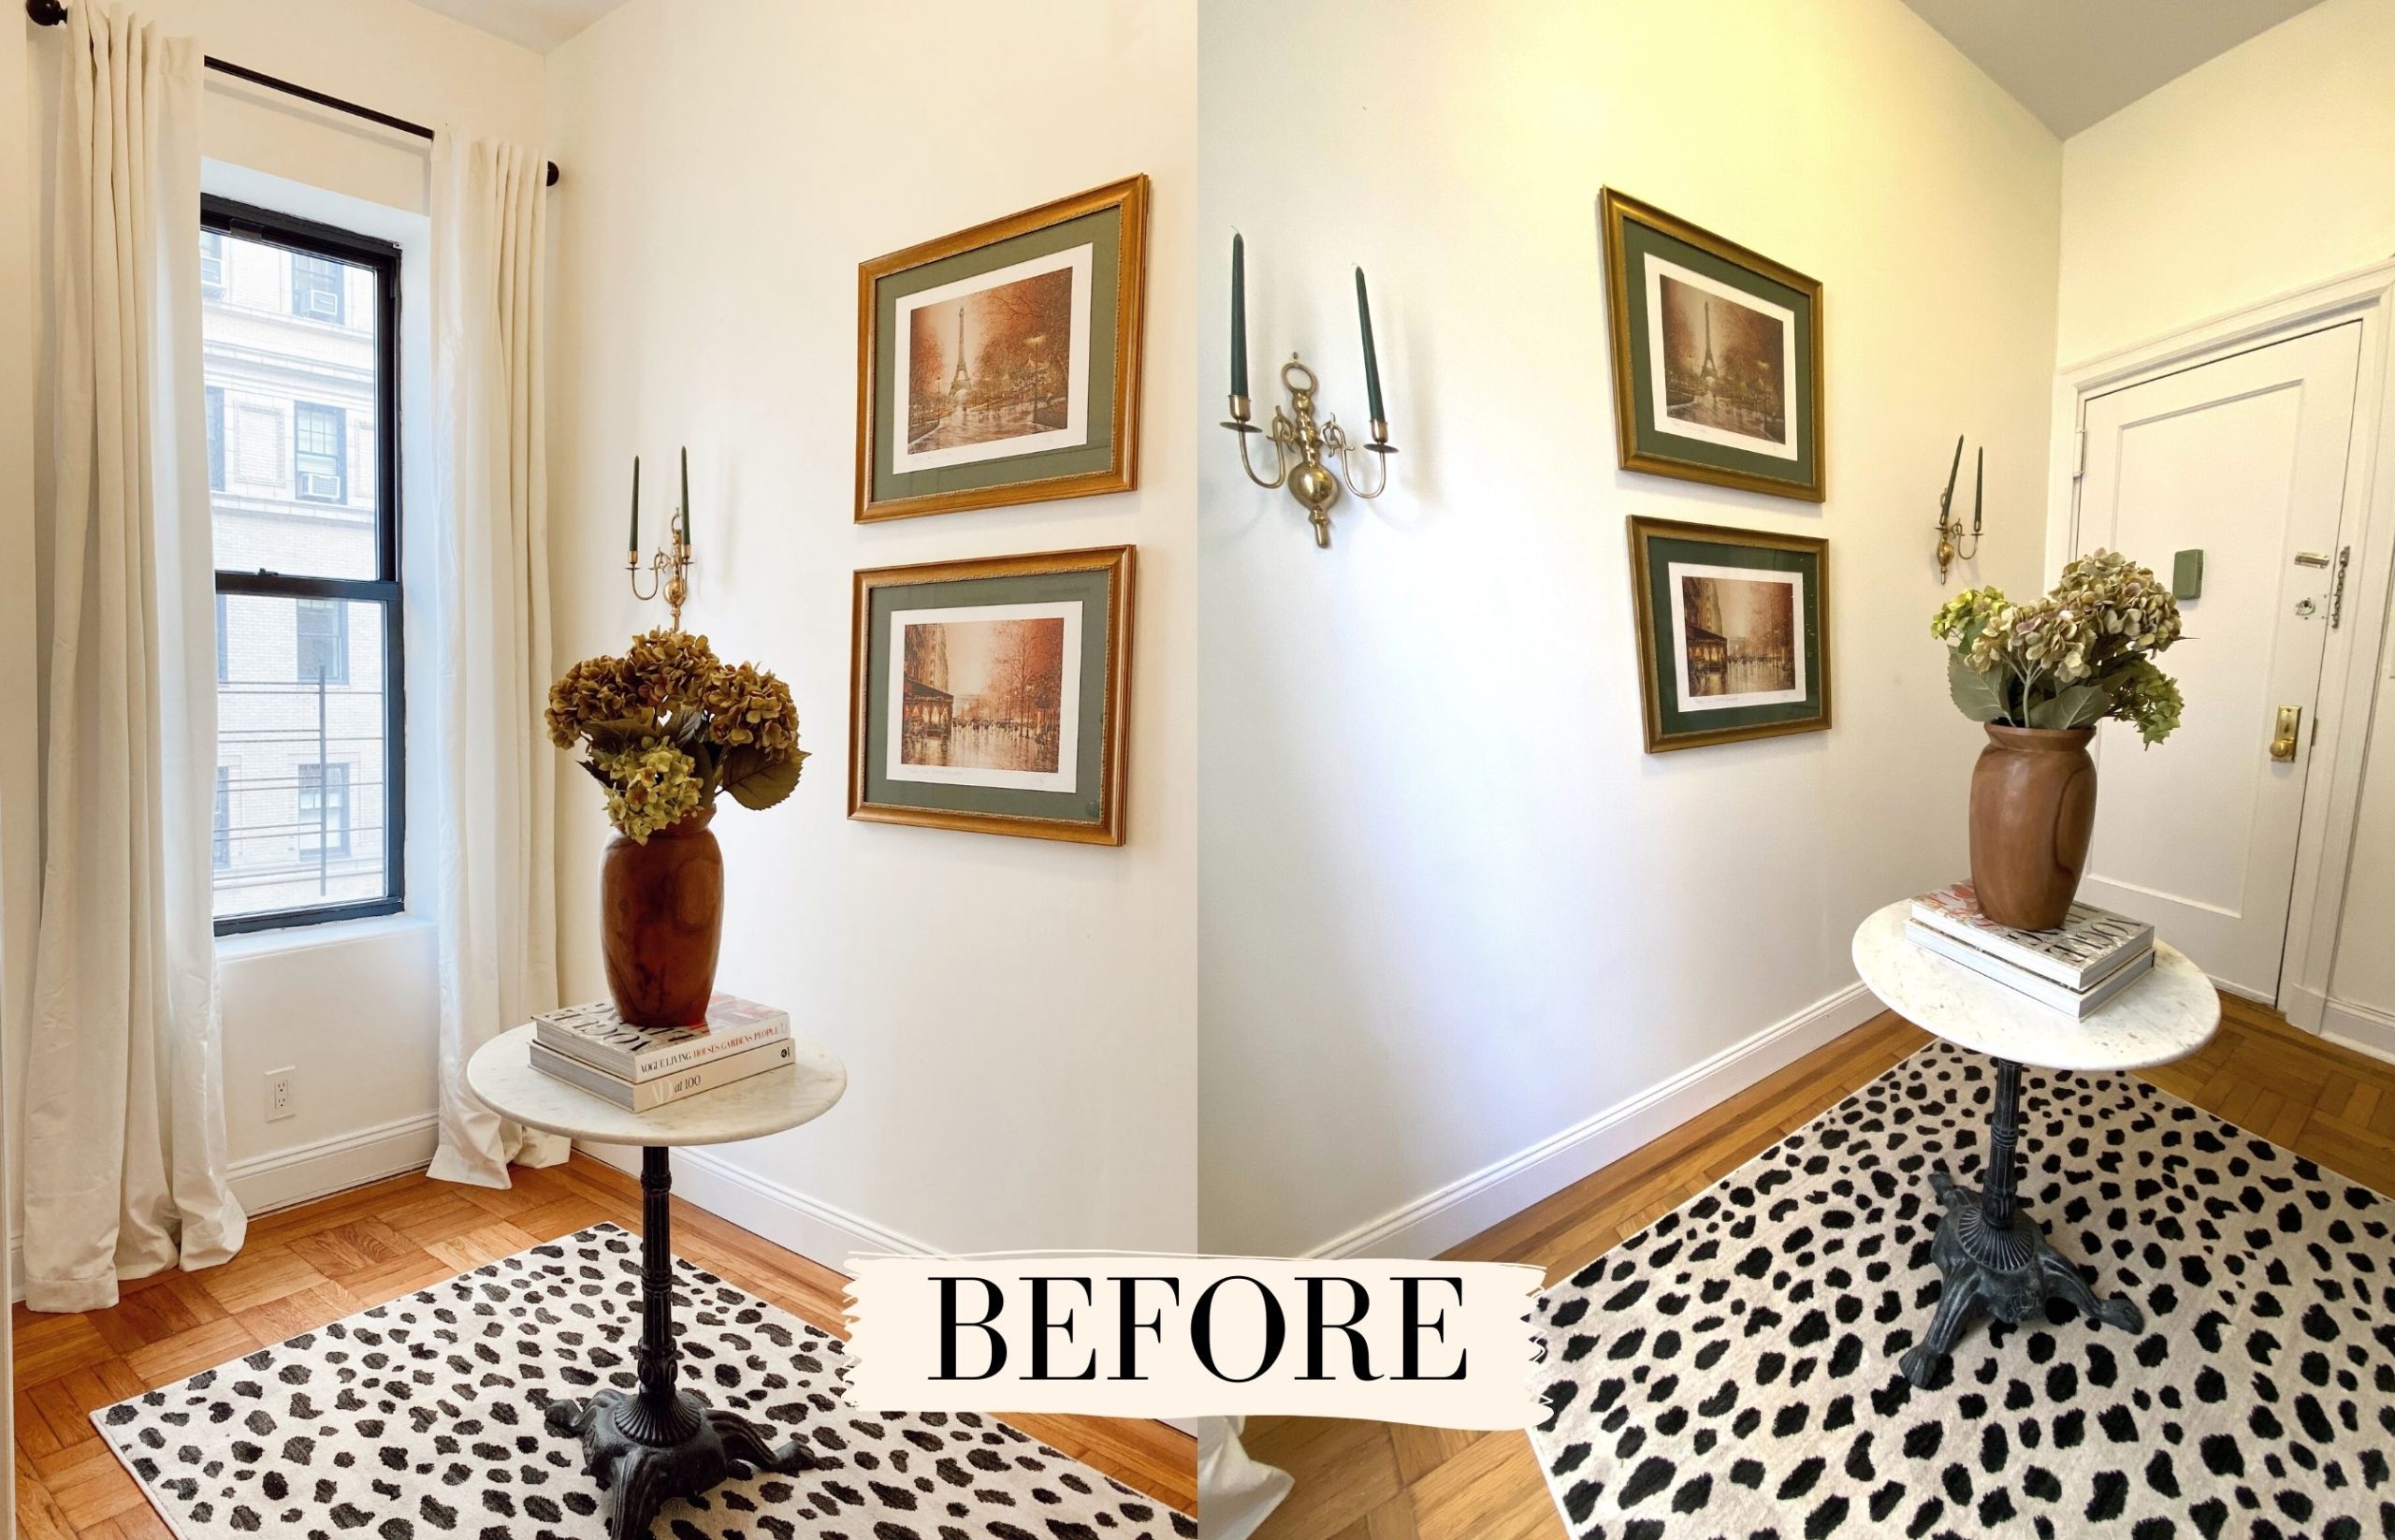 How to install picture frame molding : easy DIY project